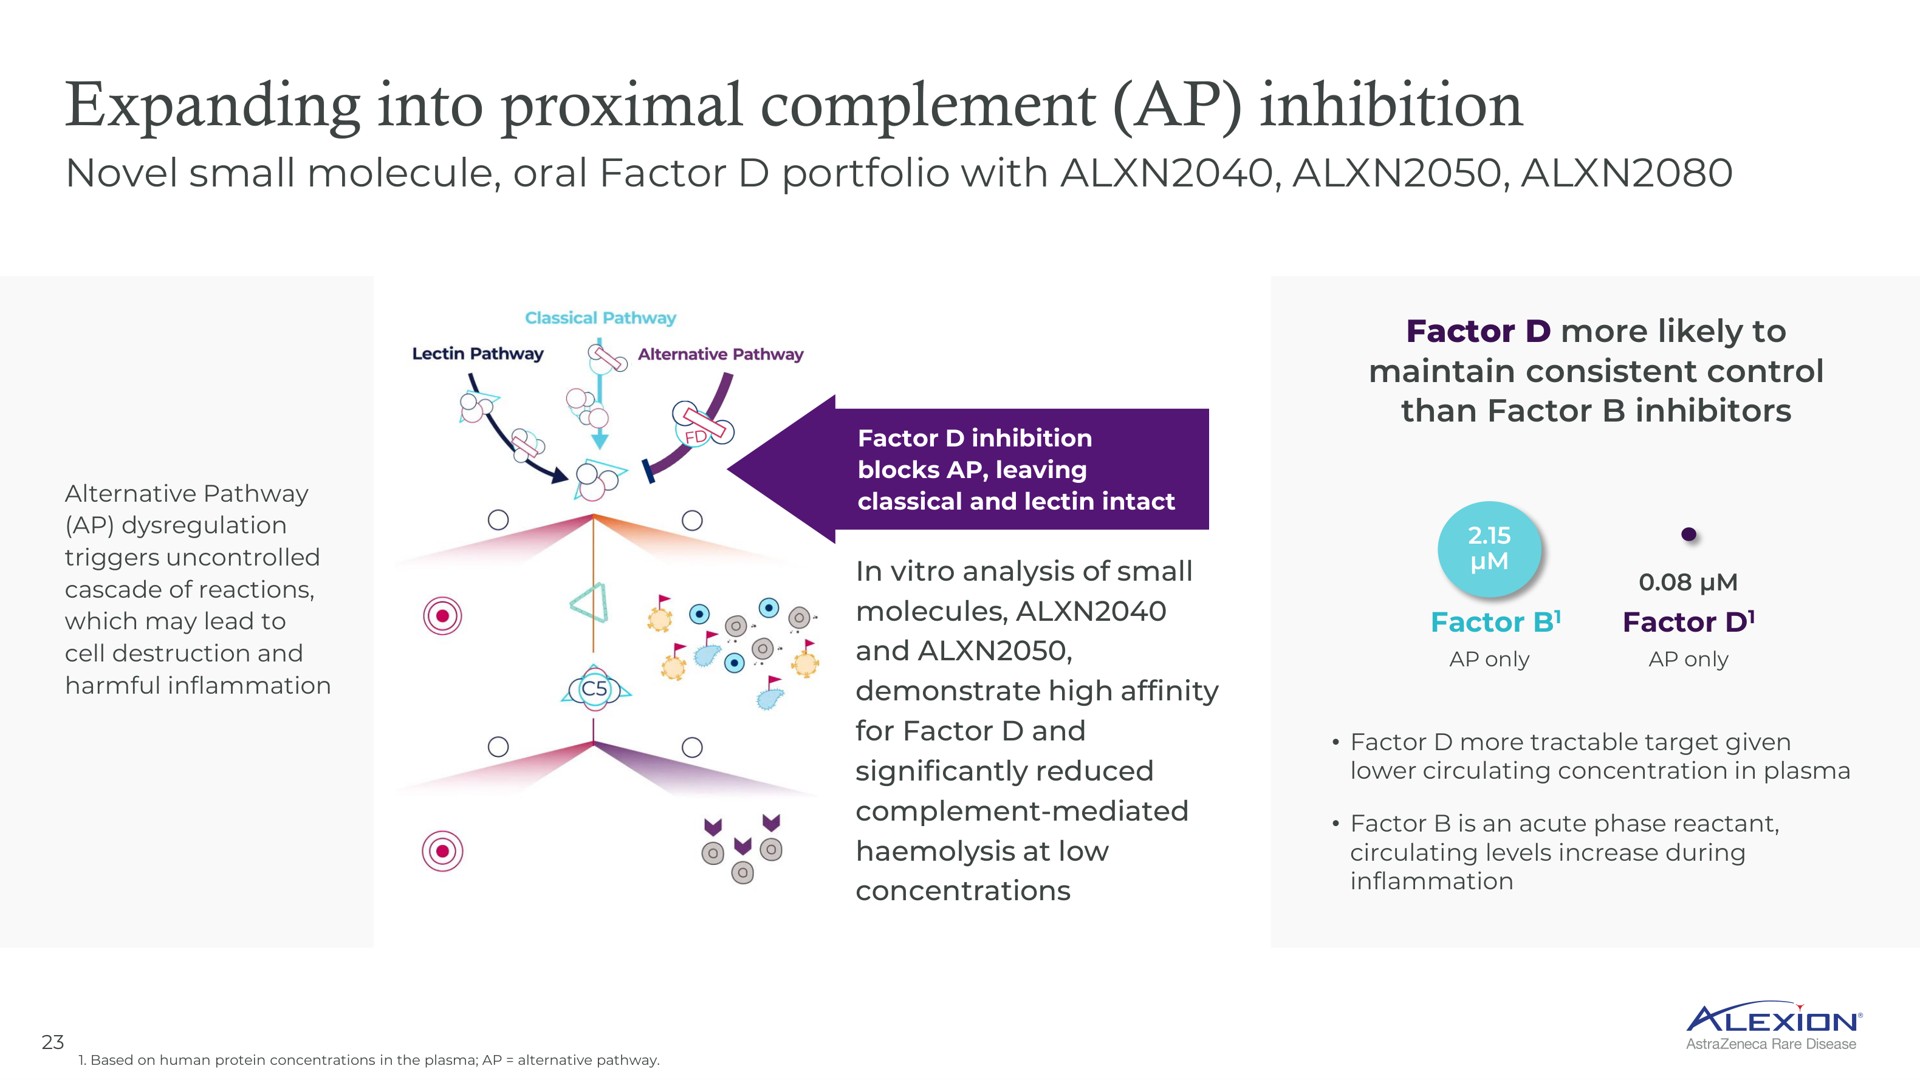 expanding into proximal complement inhibition | AstraZeneca